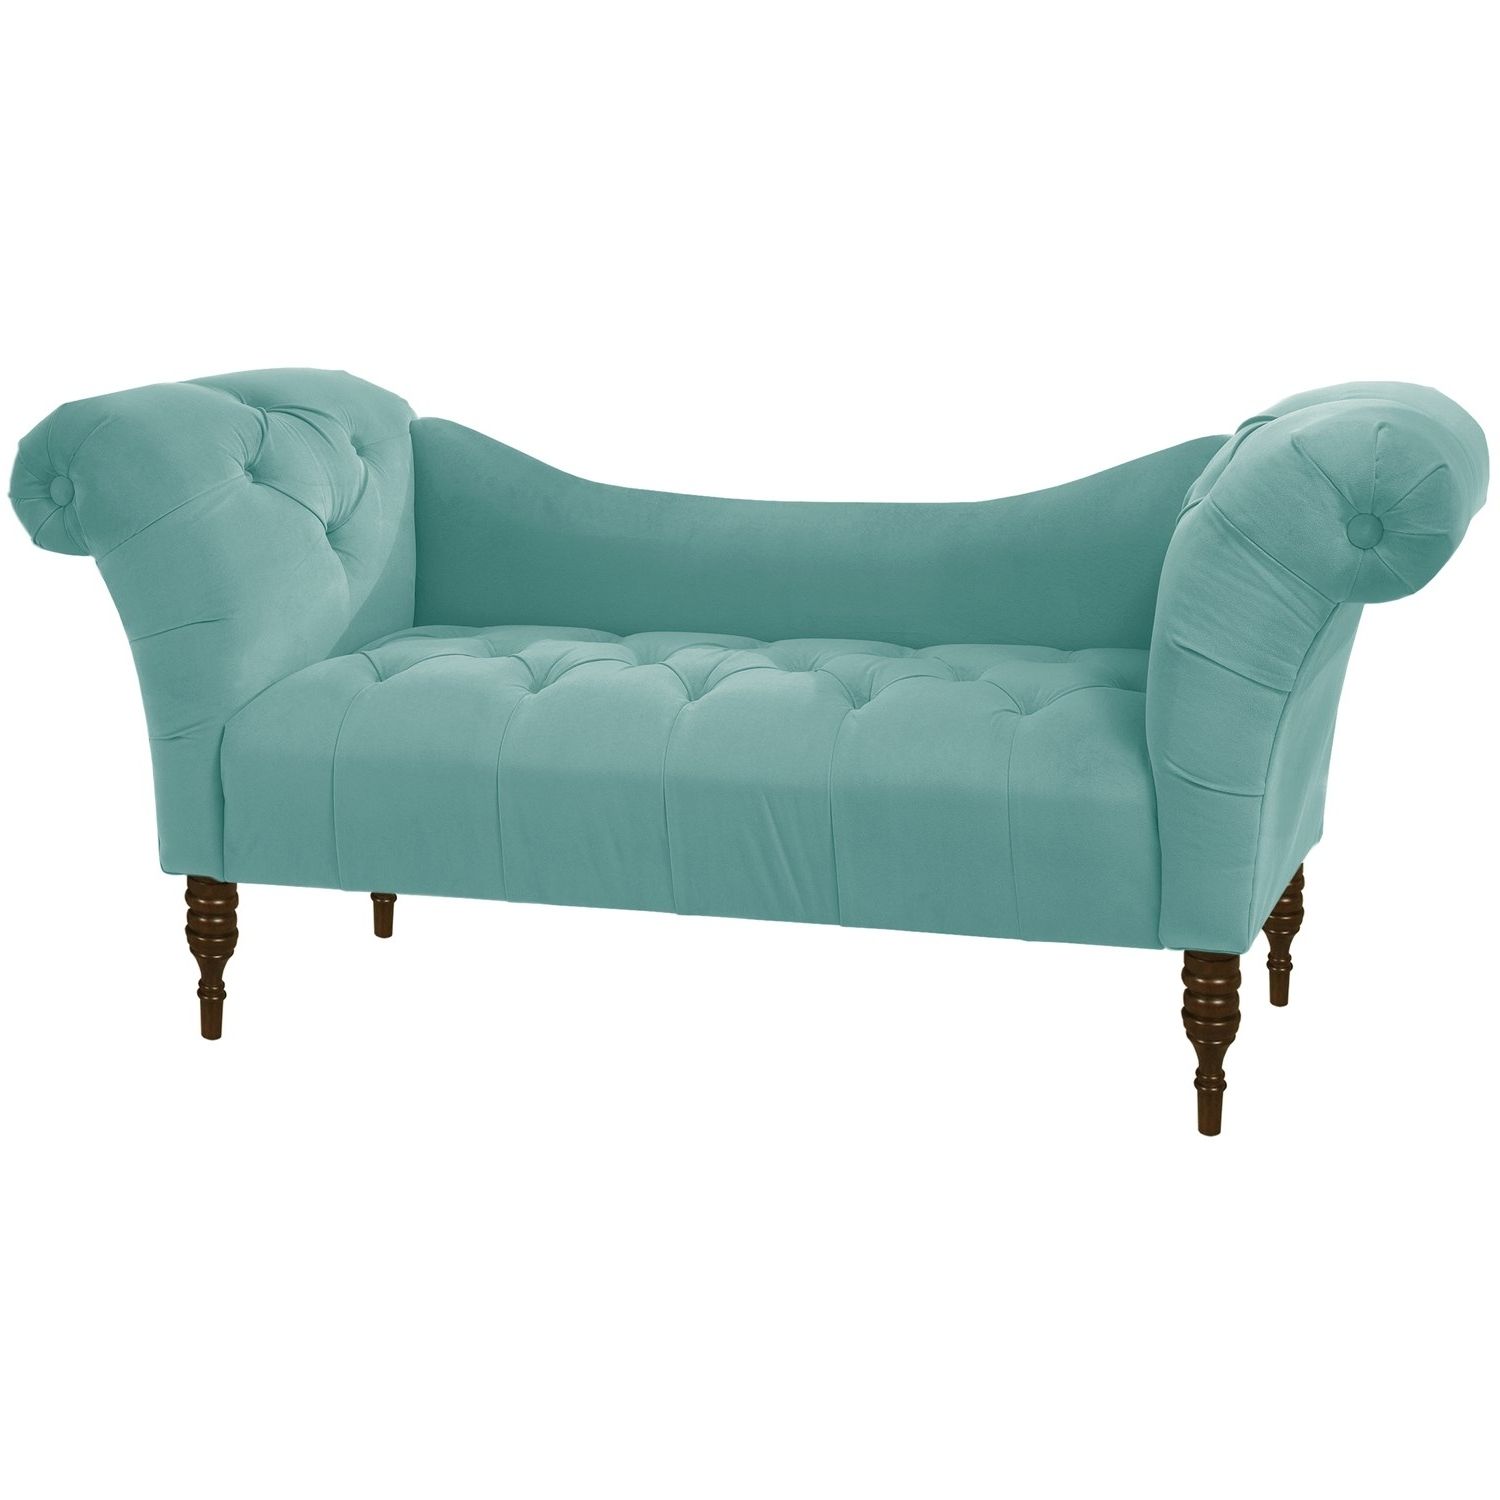 Skyline 6006vlv Tufted Chaise Lounge – Homeclick Pertaining To Trendy Tufted Chaise Lounges (View 10 of 15)